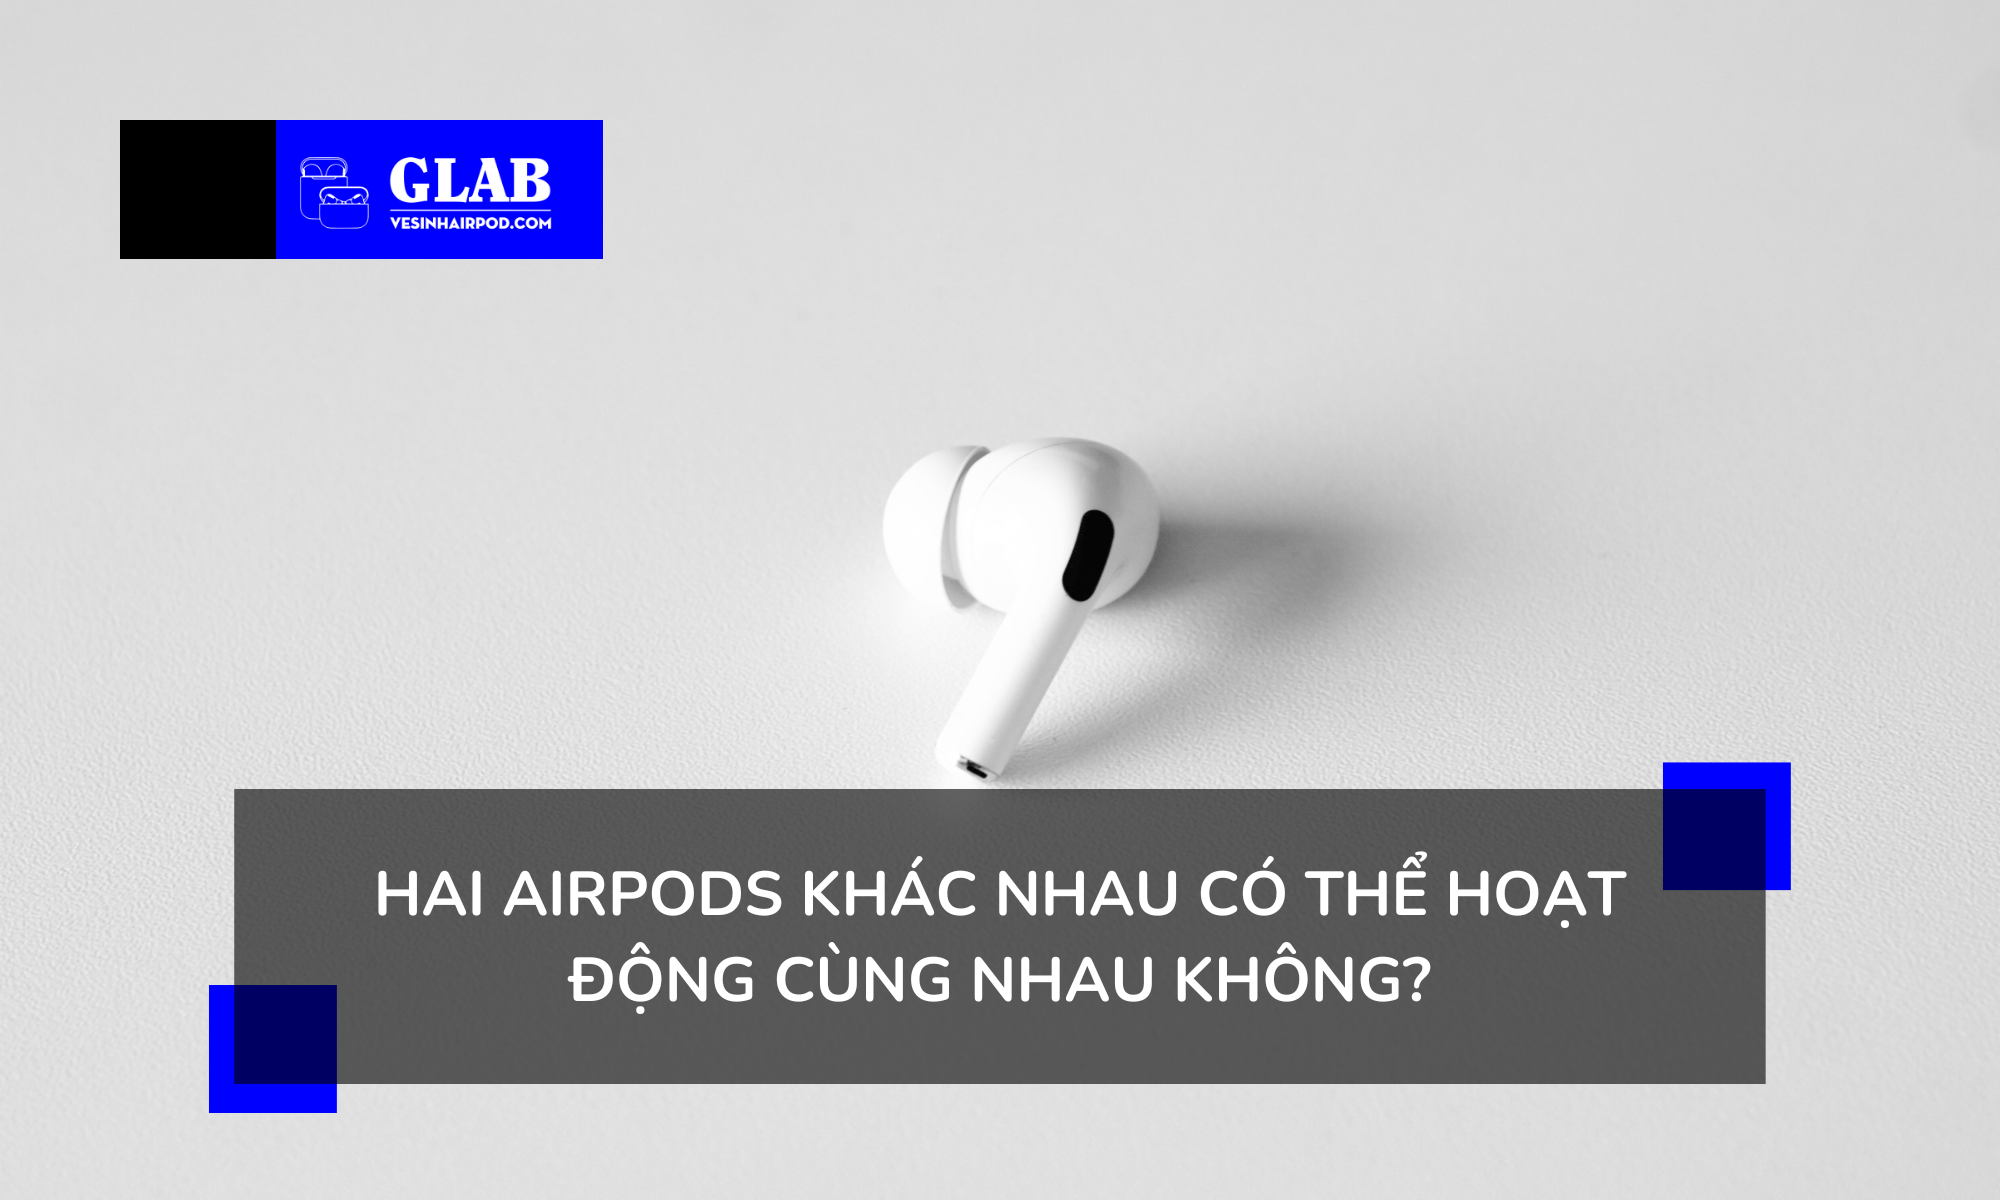 cach-ket-noi-airpods-thay-the